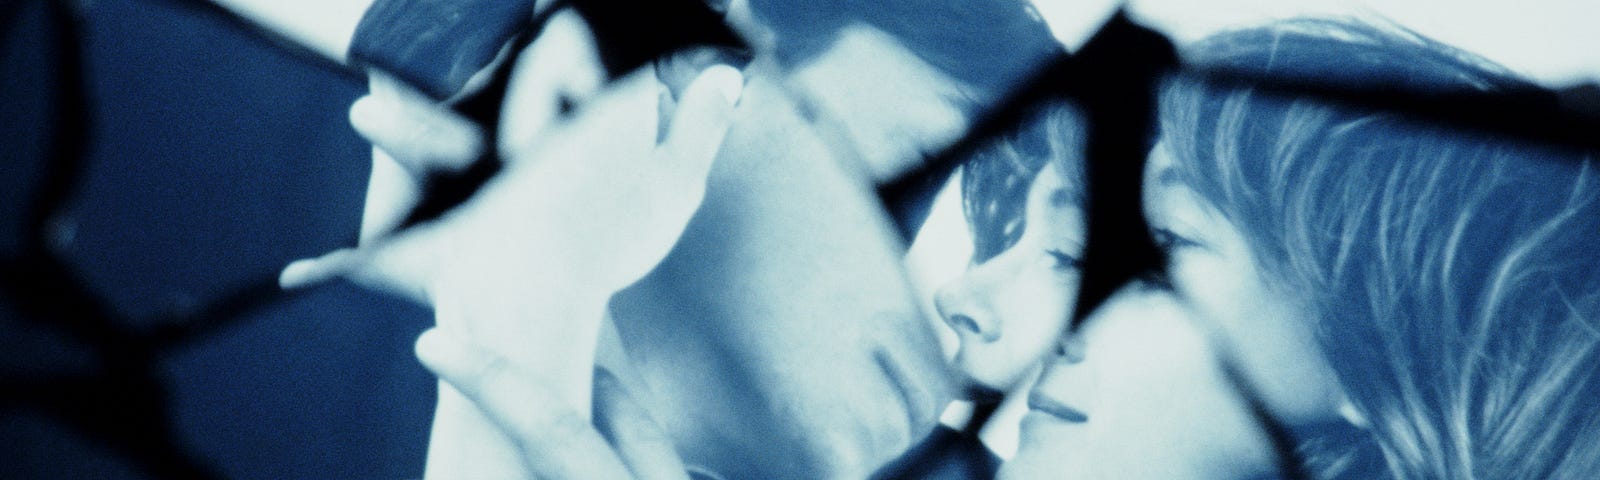 Shattered glass image of a man and woman about to kiss.